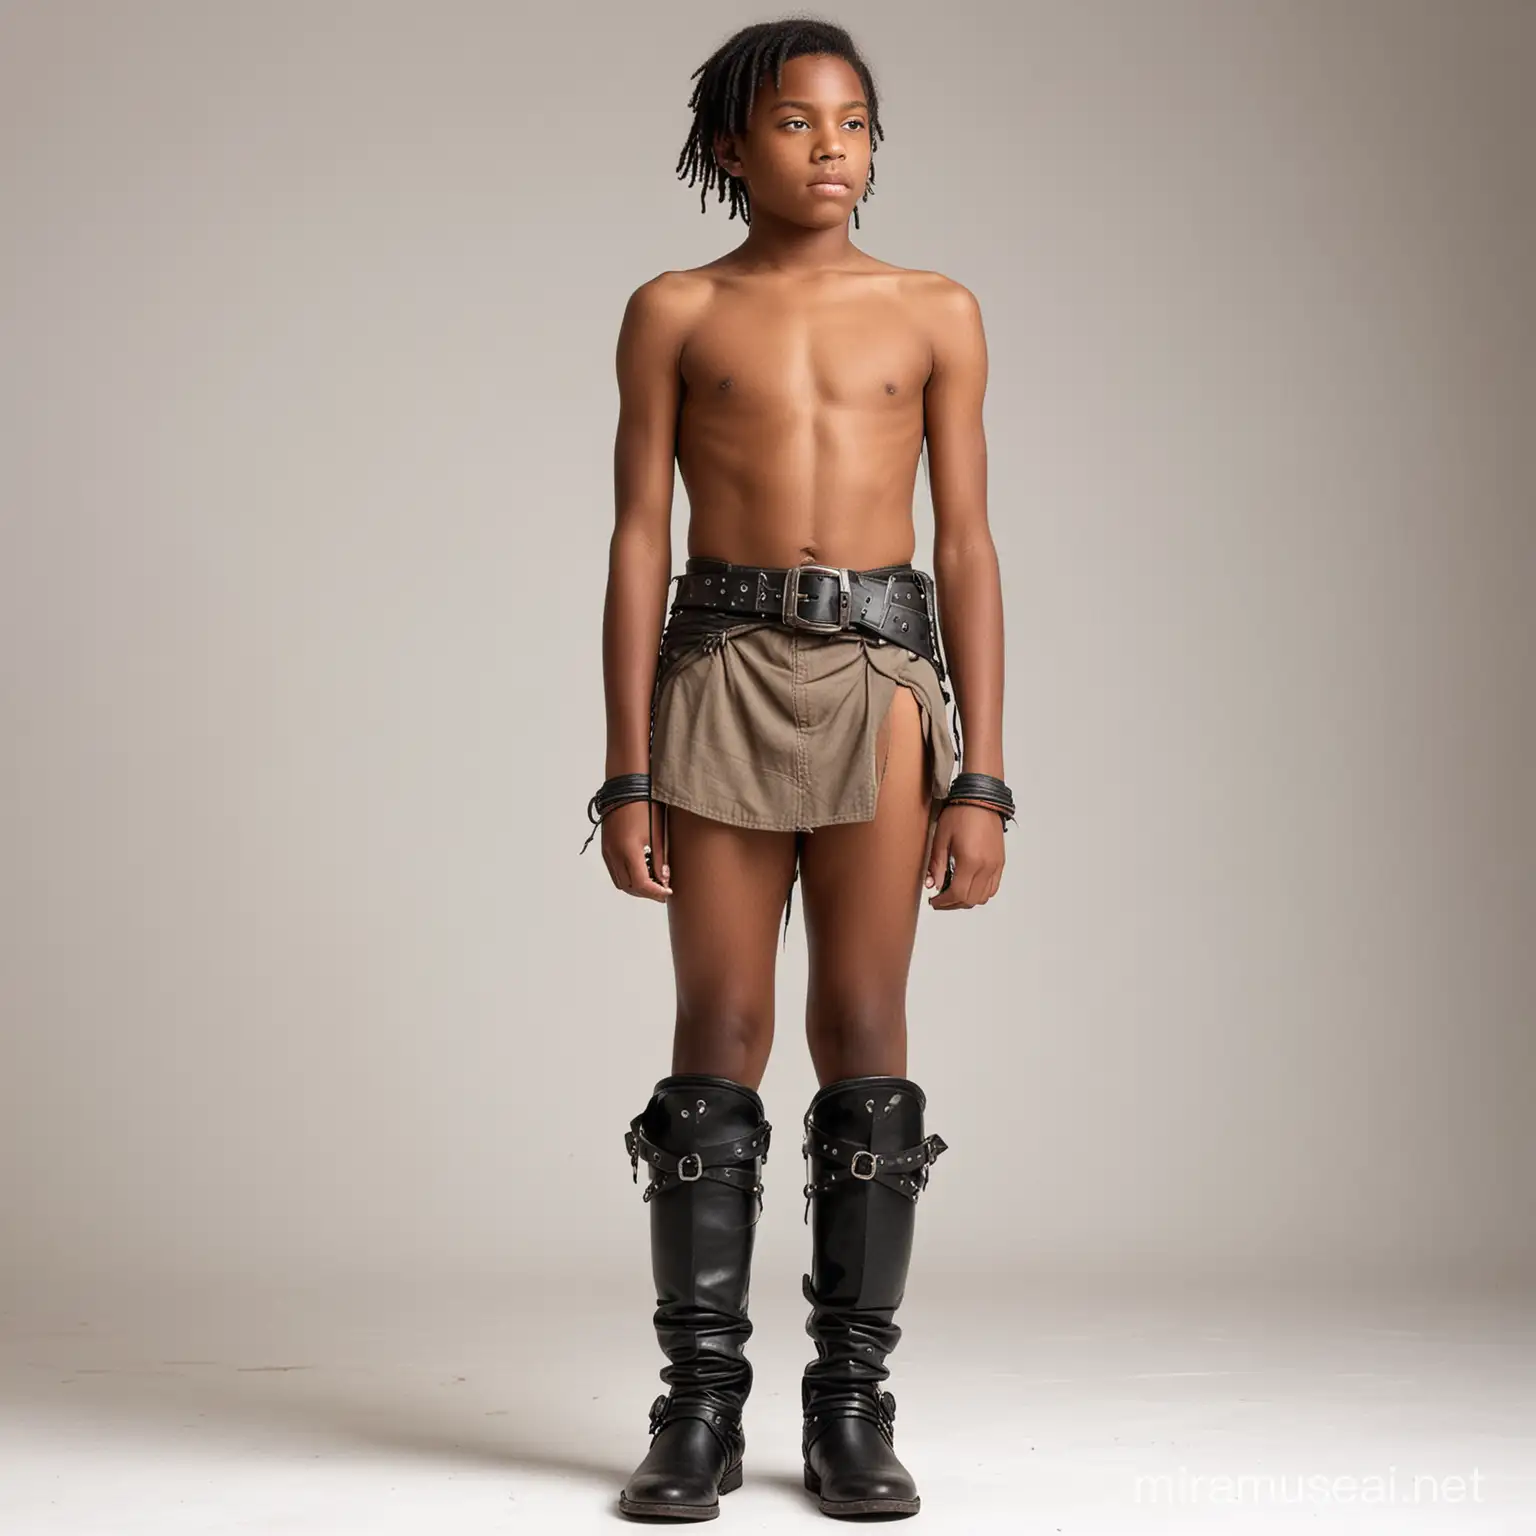 Young Black Shirtless Teenage Boy Warrior in Short Loincloth and Leather Belt